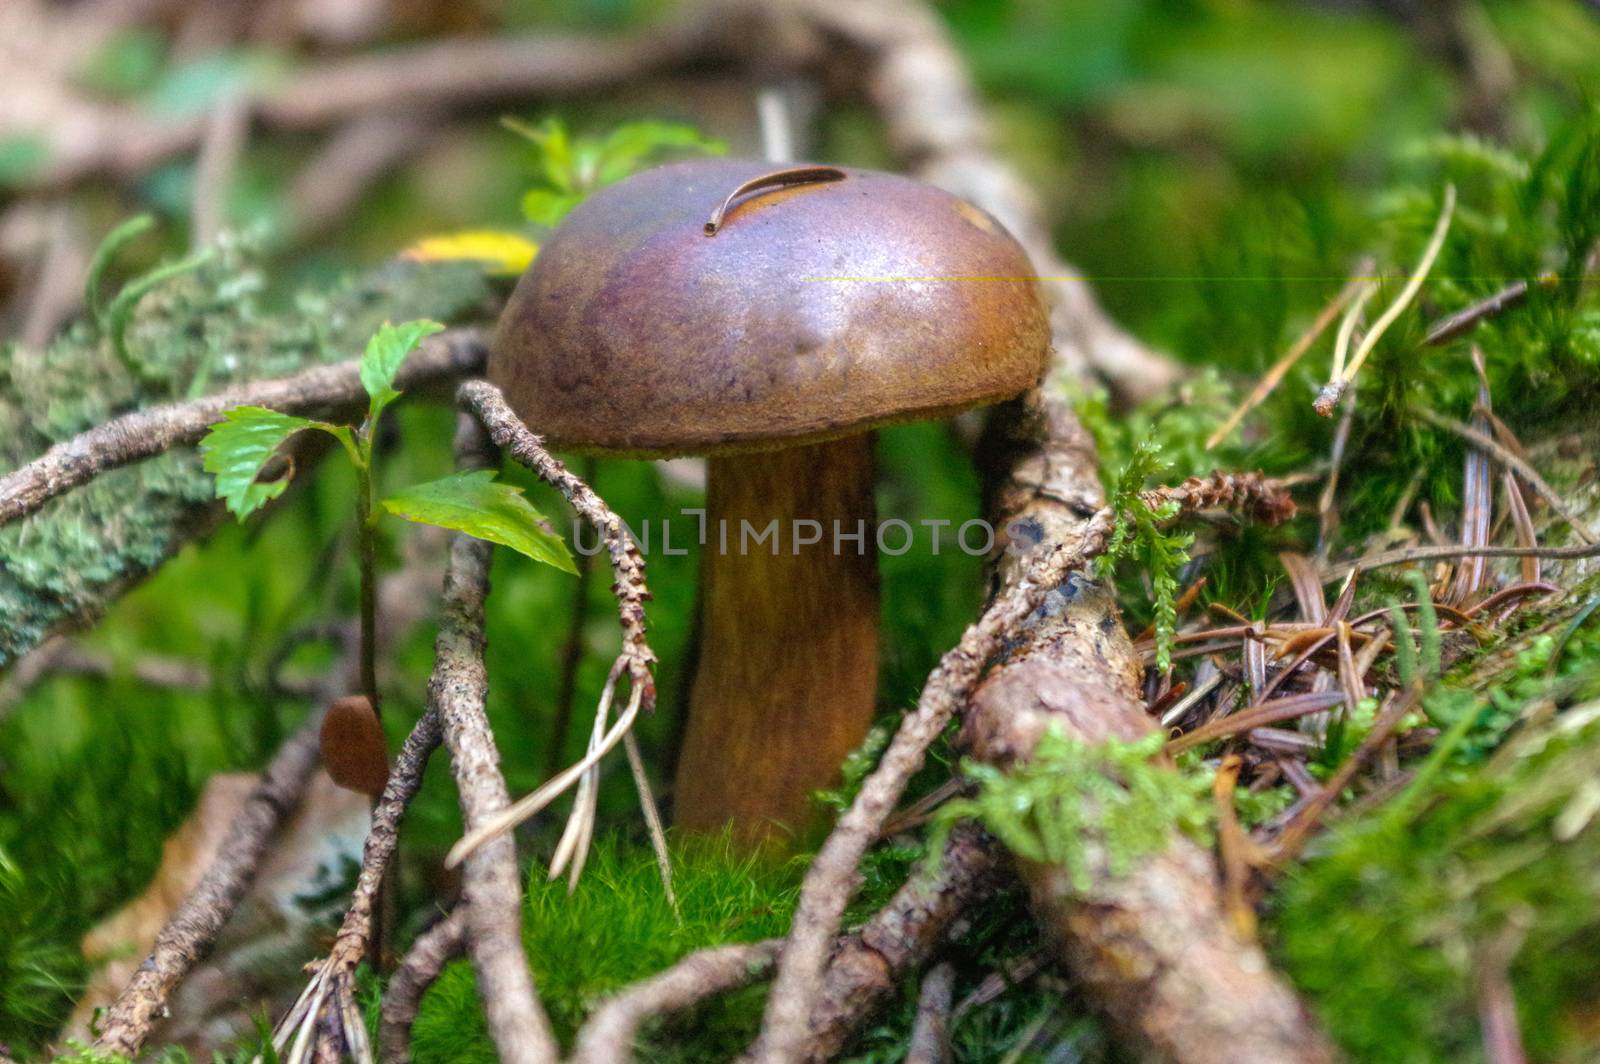 a suillus bovinus growing in the forest, also known as the Jersey cow mushroom or bovine bolete